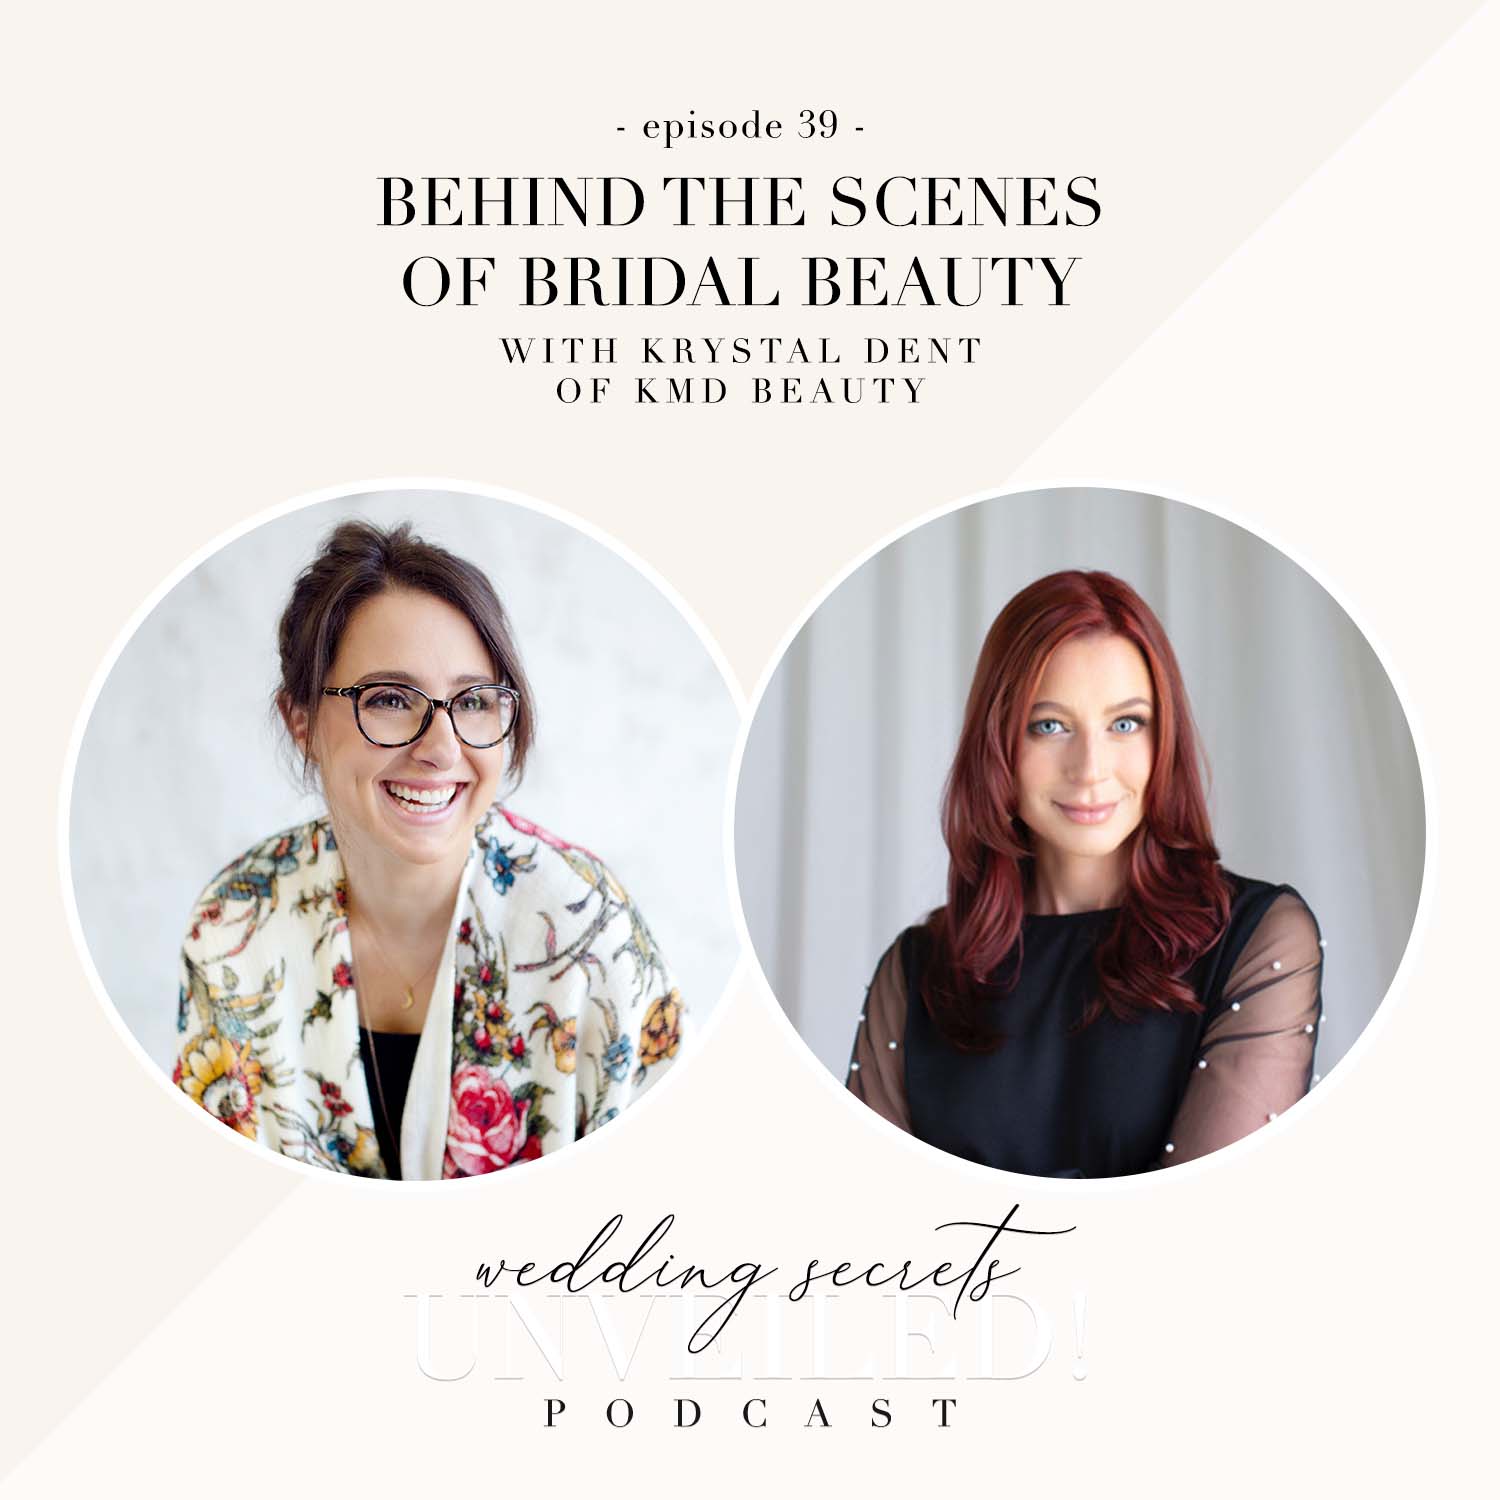 Behind the Scenes of Bridal Beauty with Krystal Dent of KMD Beauty on Wedding Secrets Unveiled! Learn beauty tricks for your wedding day